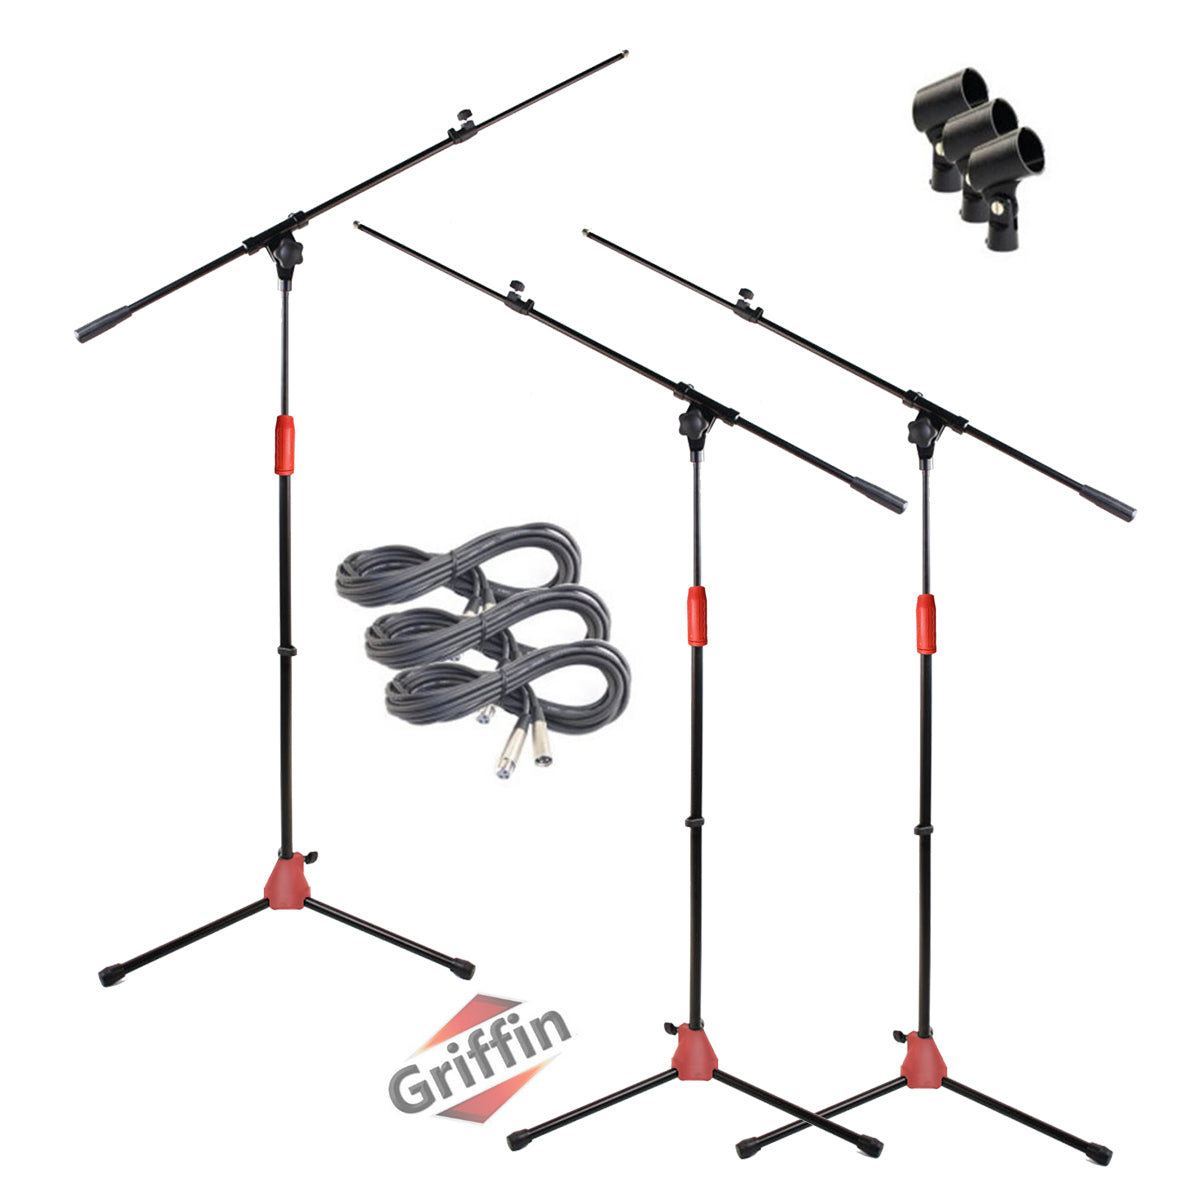 Microphone Boom Stand with XLR Mic Cable & Clip (Pack of 3) by GRIFFIN - Telescoping Arm Tripod Legs